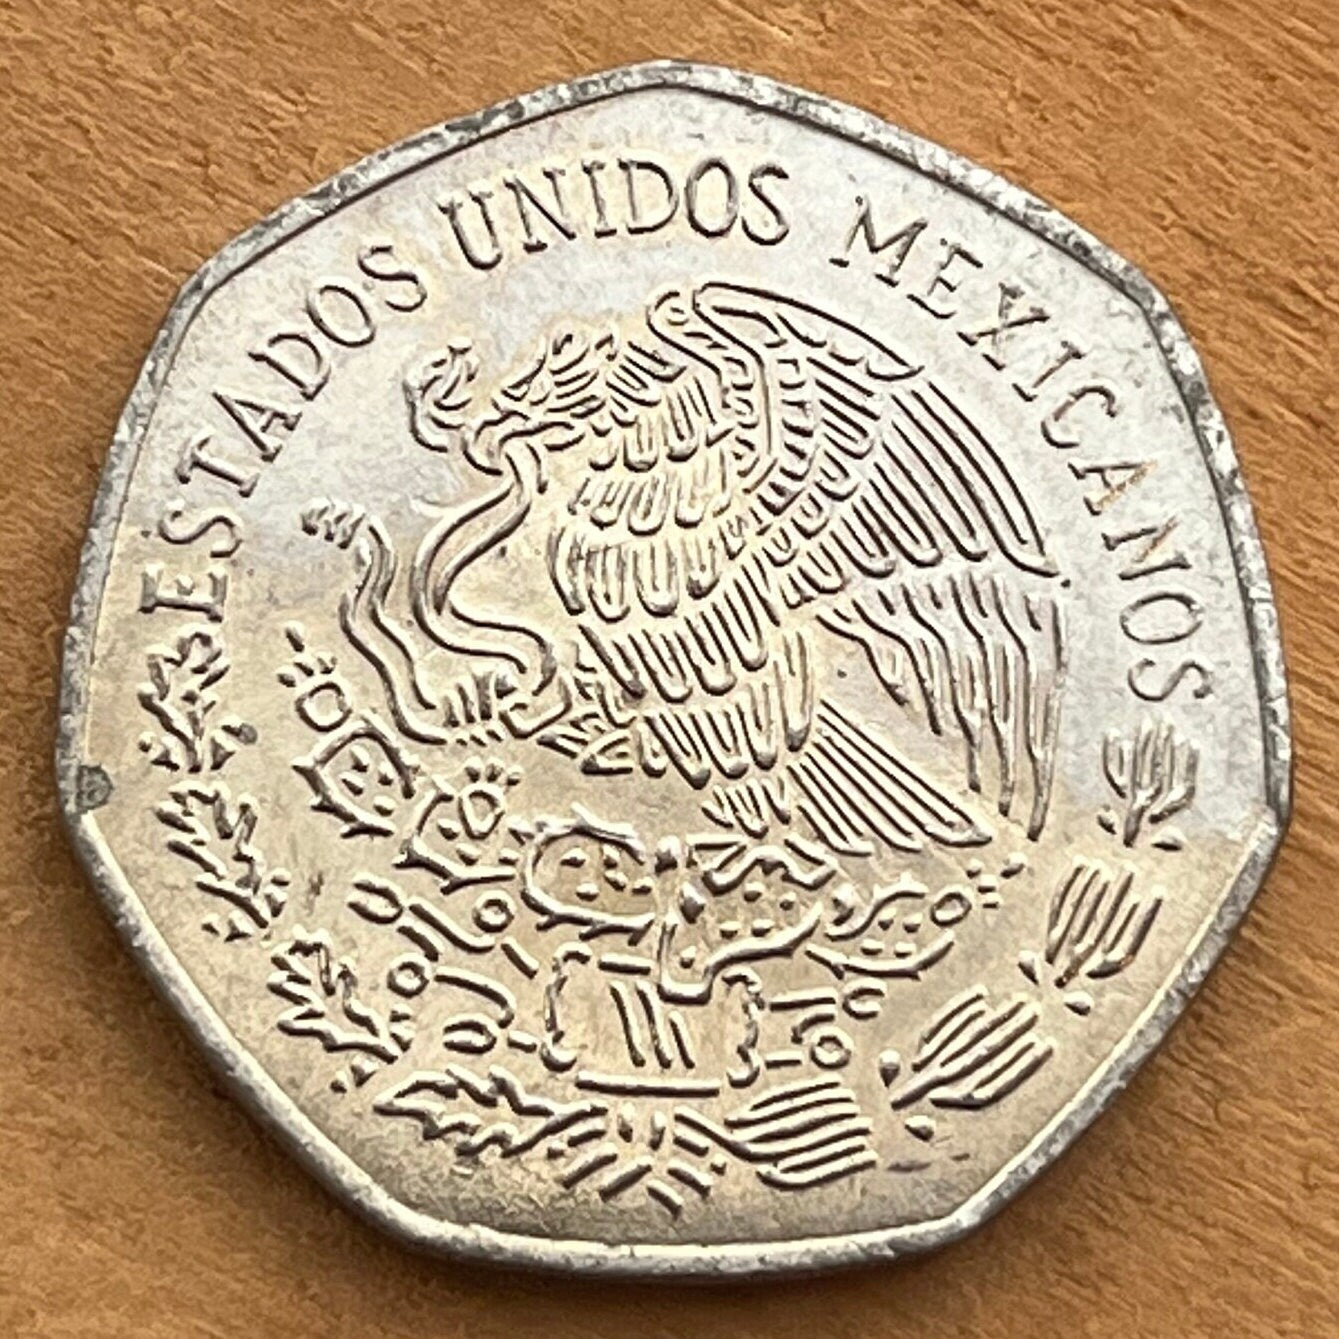 Don Miguel Hidalgo & Eagle with Snake 20 Centavos Mexico Authentic Coin Money for Jewelry (Cry of Dolores) (7-Sided) (Father of the Nation)